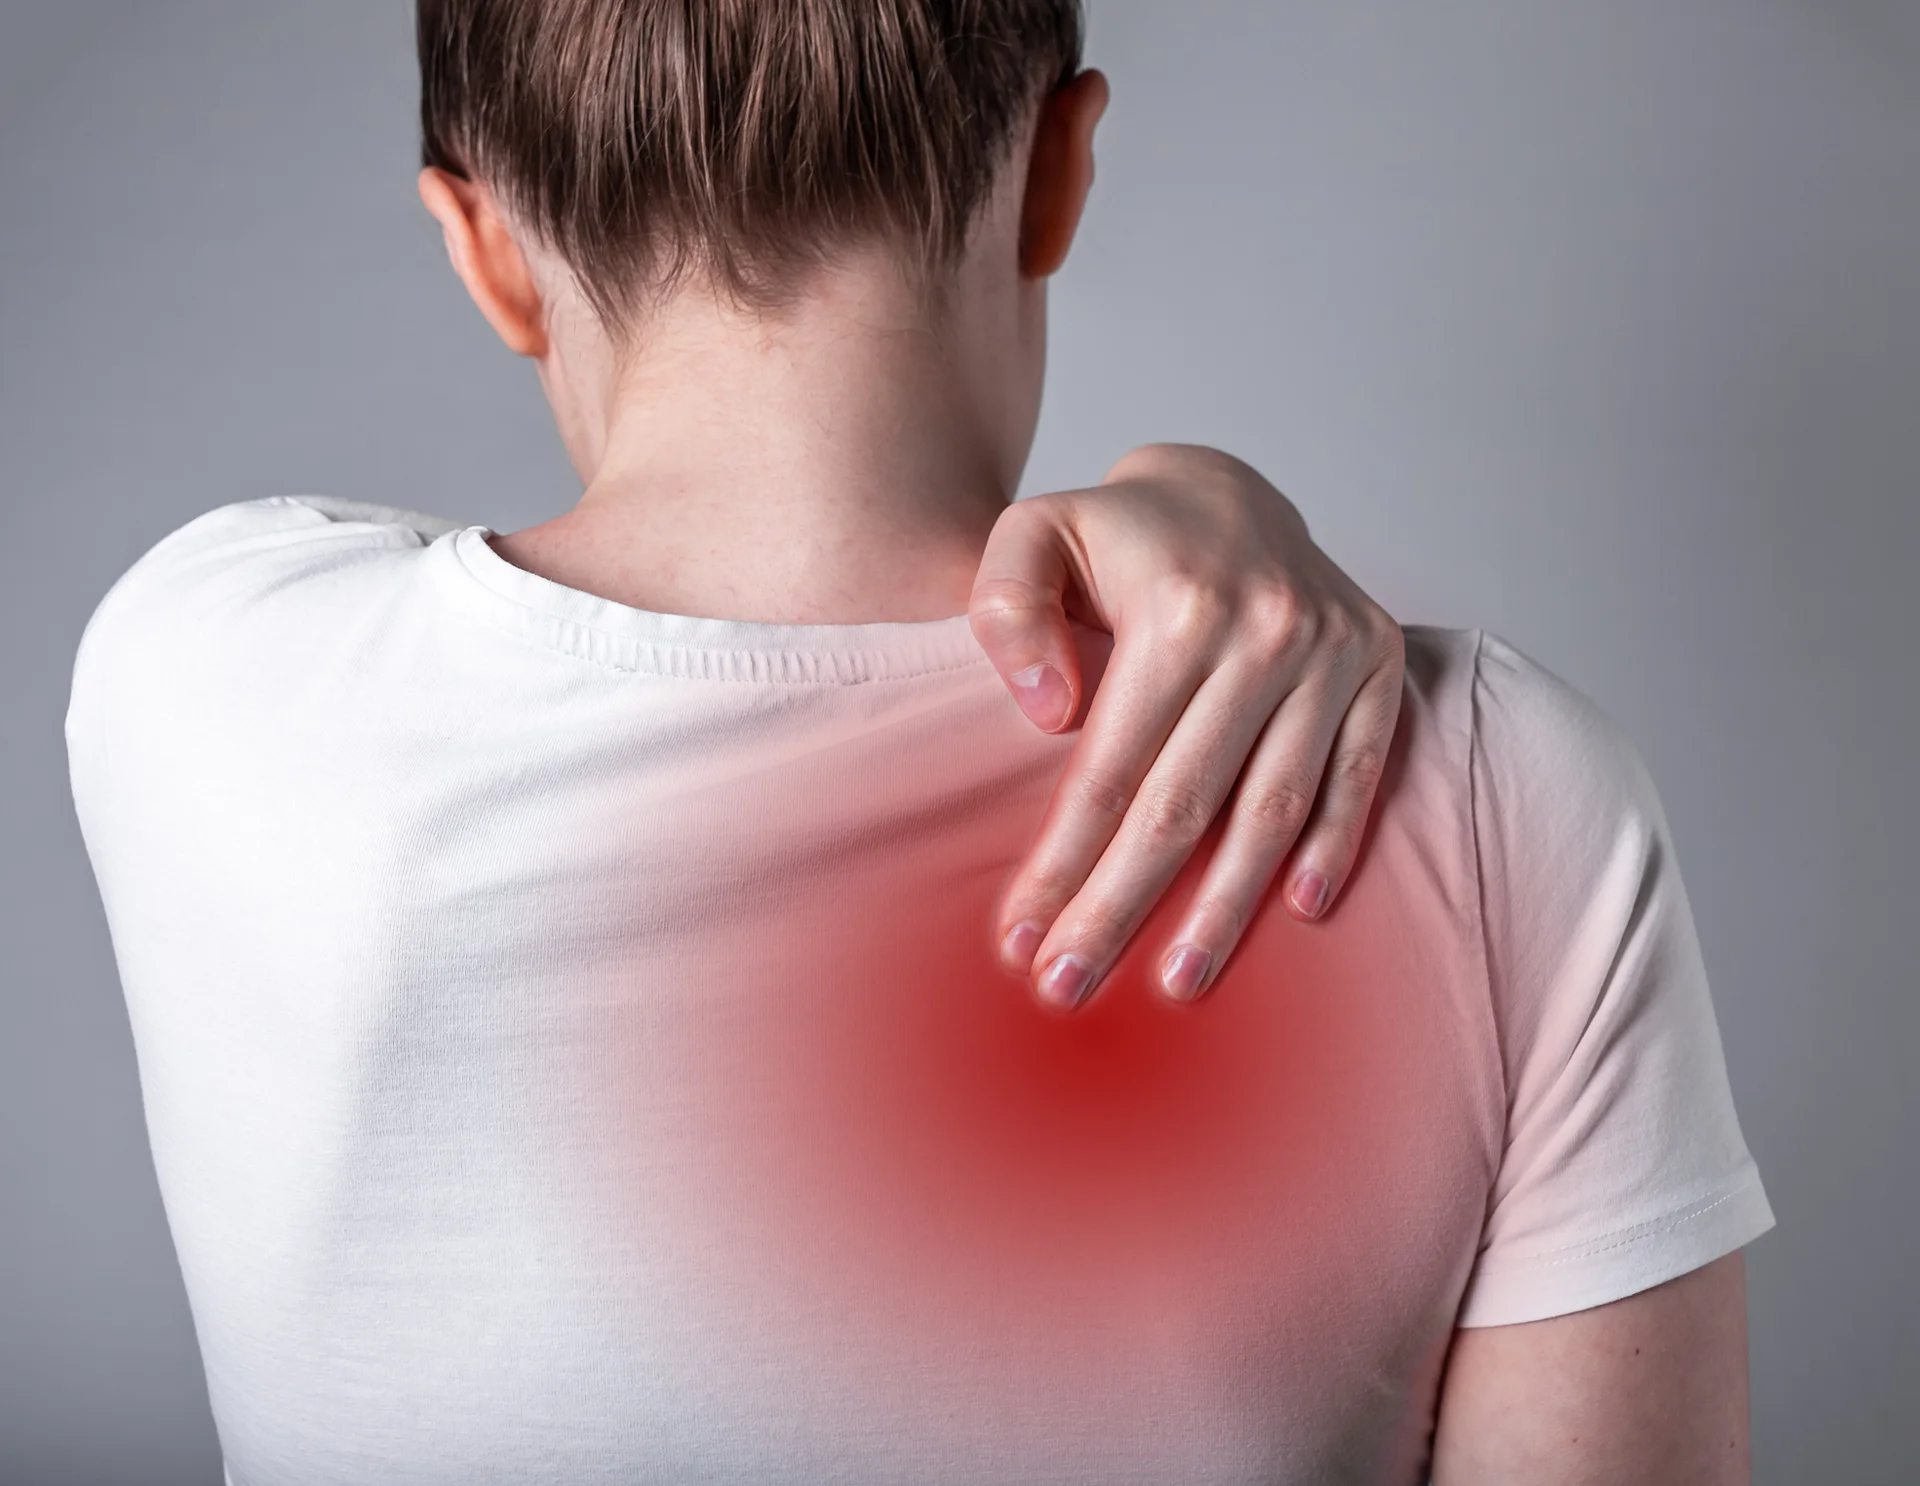 a woman suffers from back pain between shoulder blades